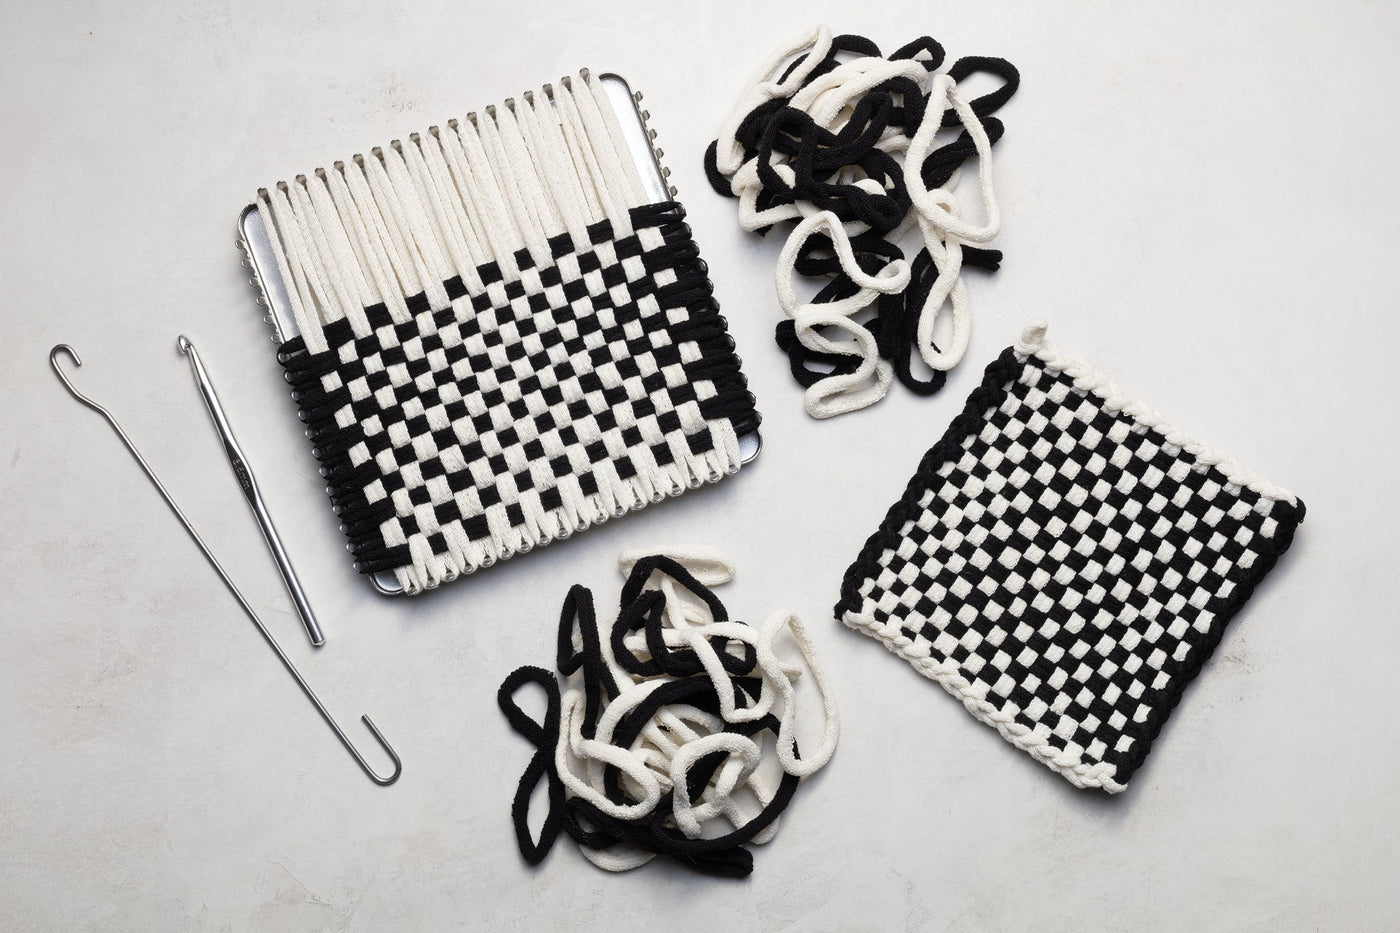 All-n-One Knitting Loom Launch by Authentic Knitting Board Company